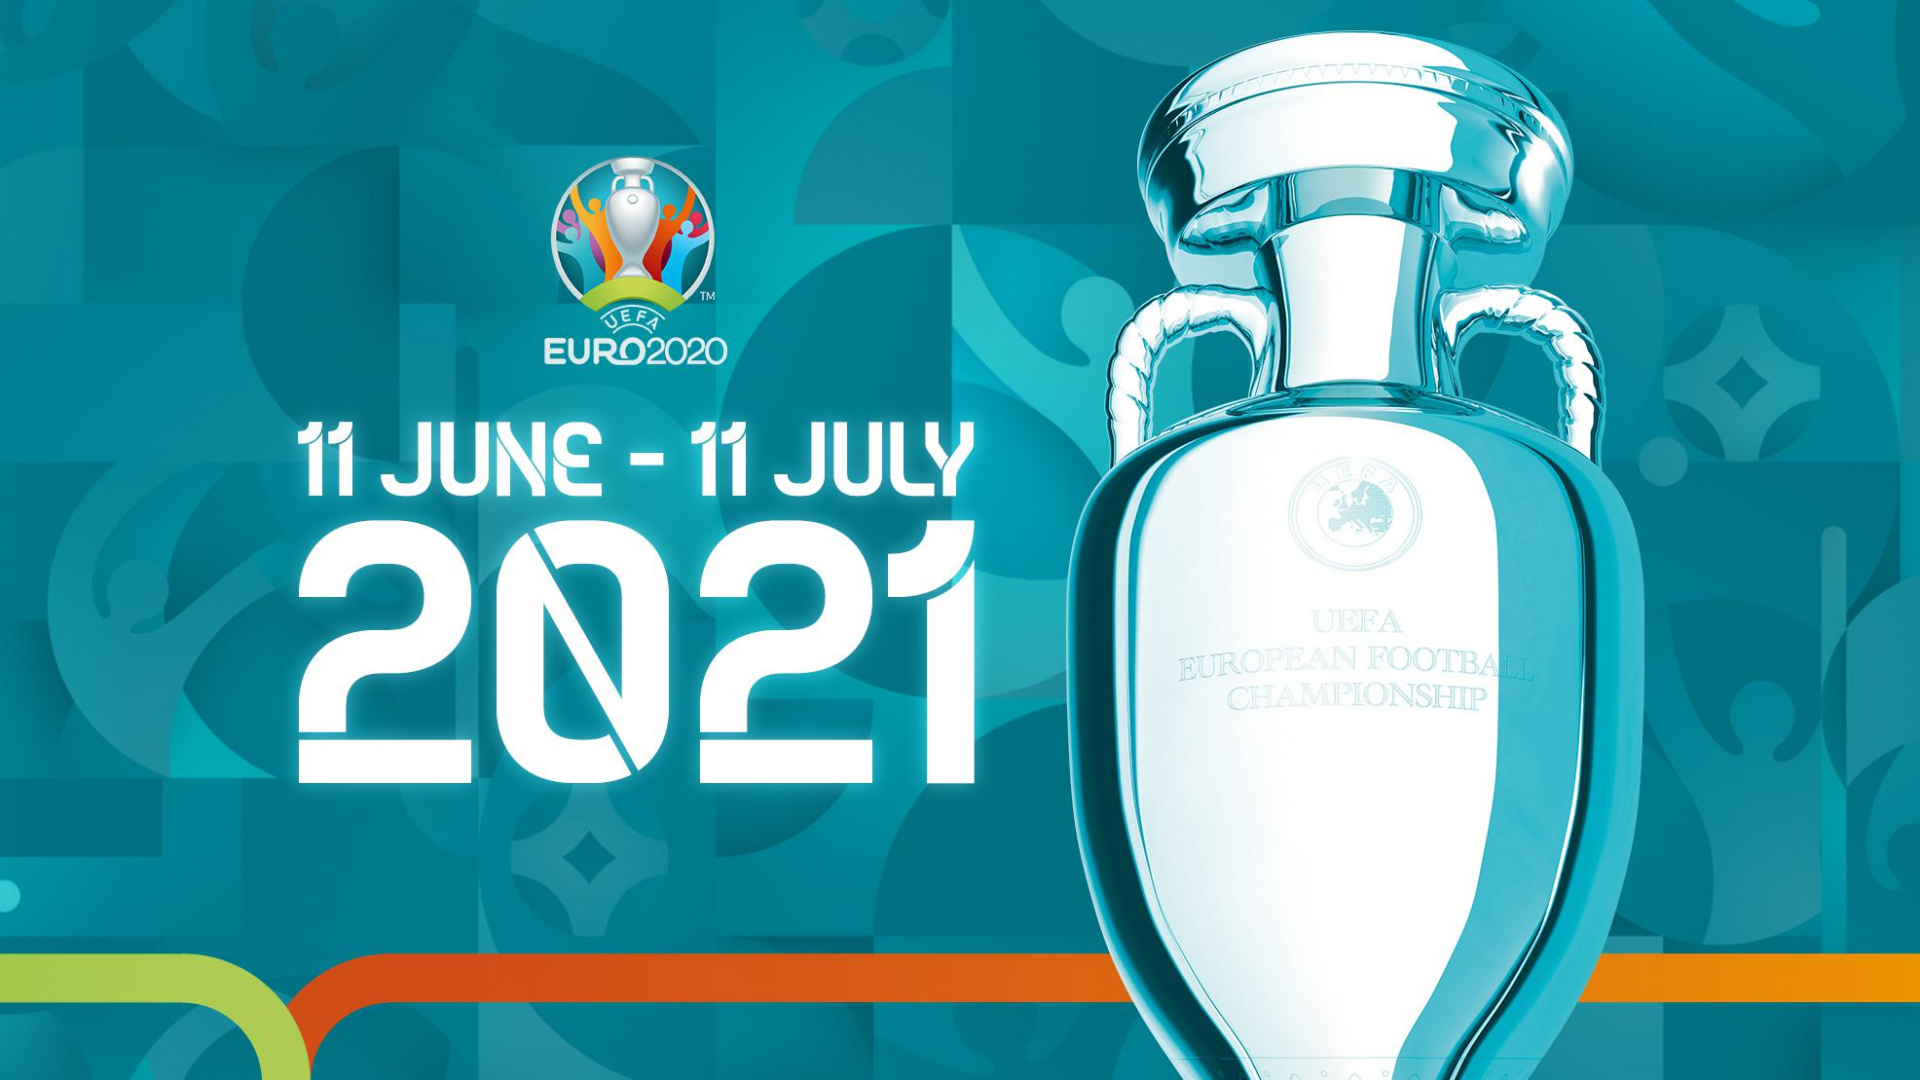 UEFA EURO 2020 match schedule: fixtures, venues, dates and kick-off time